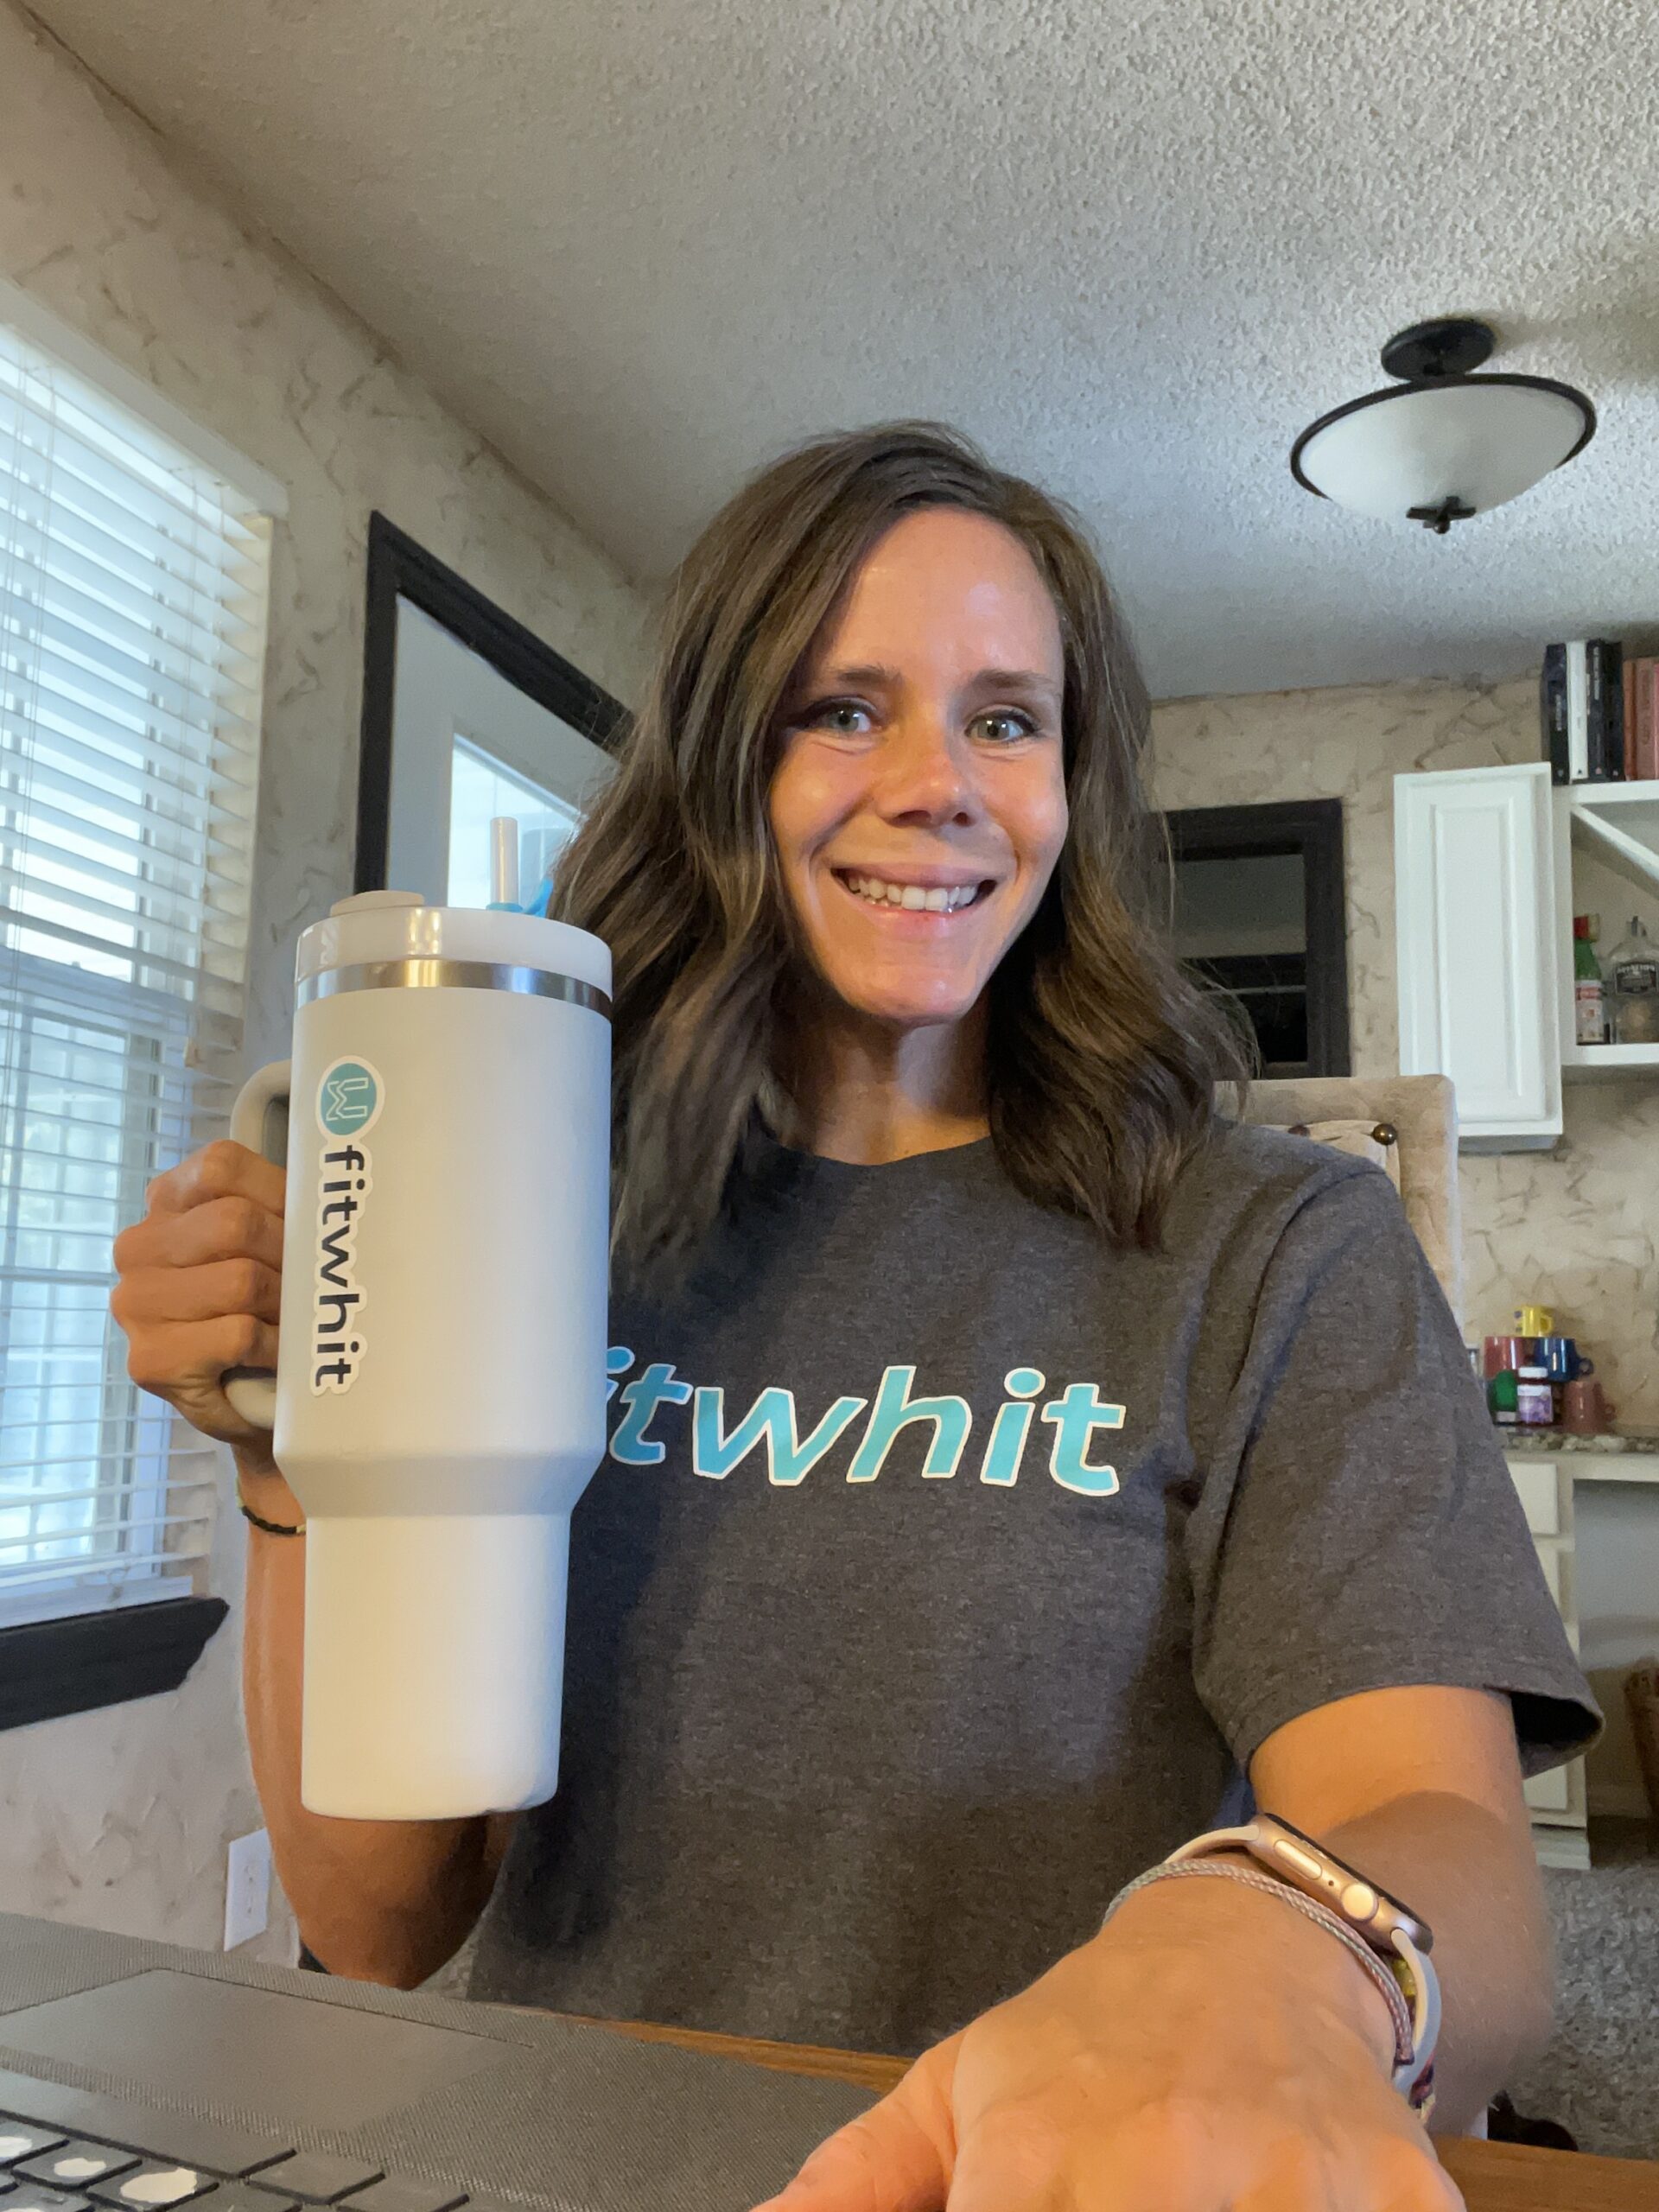 How Dehydration Can Lead to Water Retention by Whitney Vaughan of FitWhit